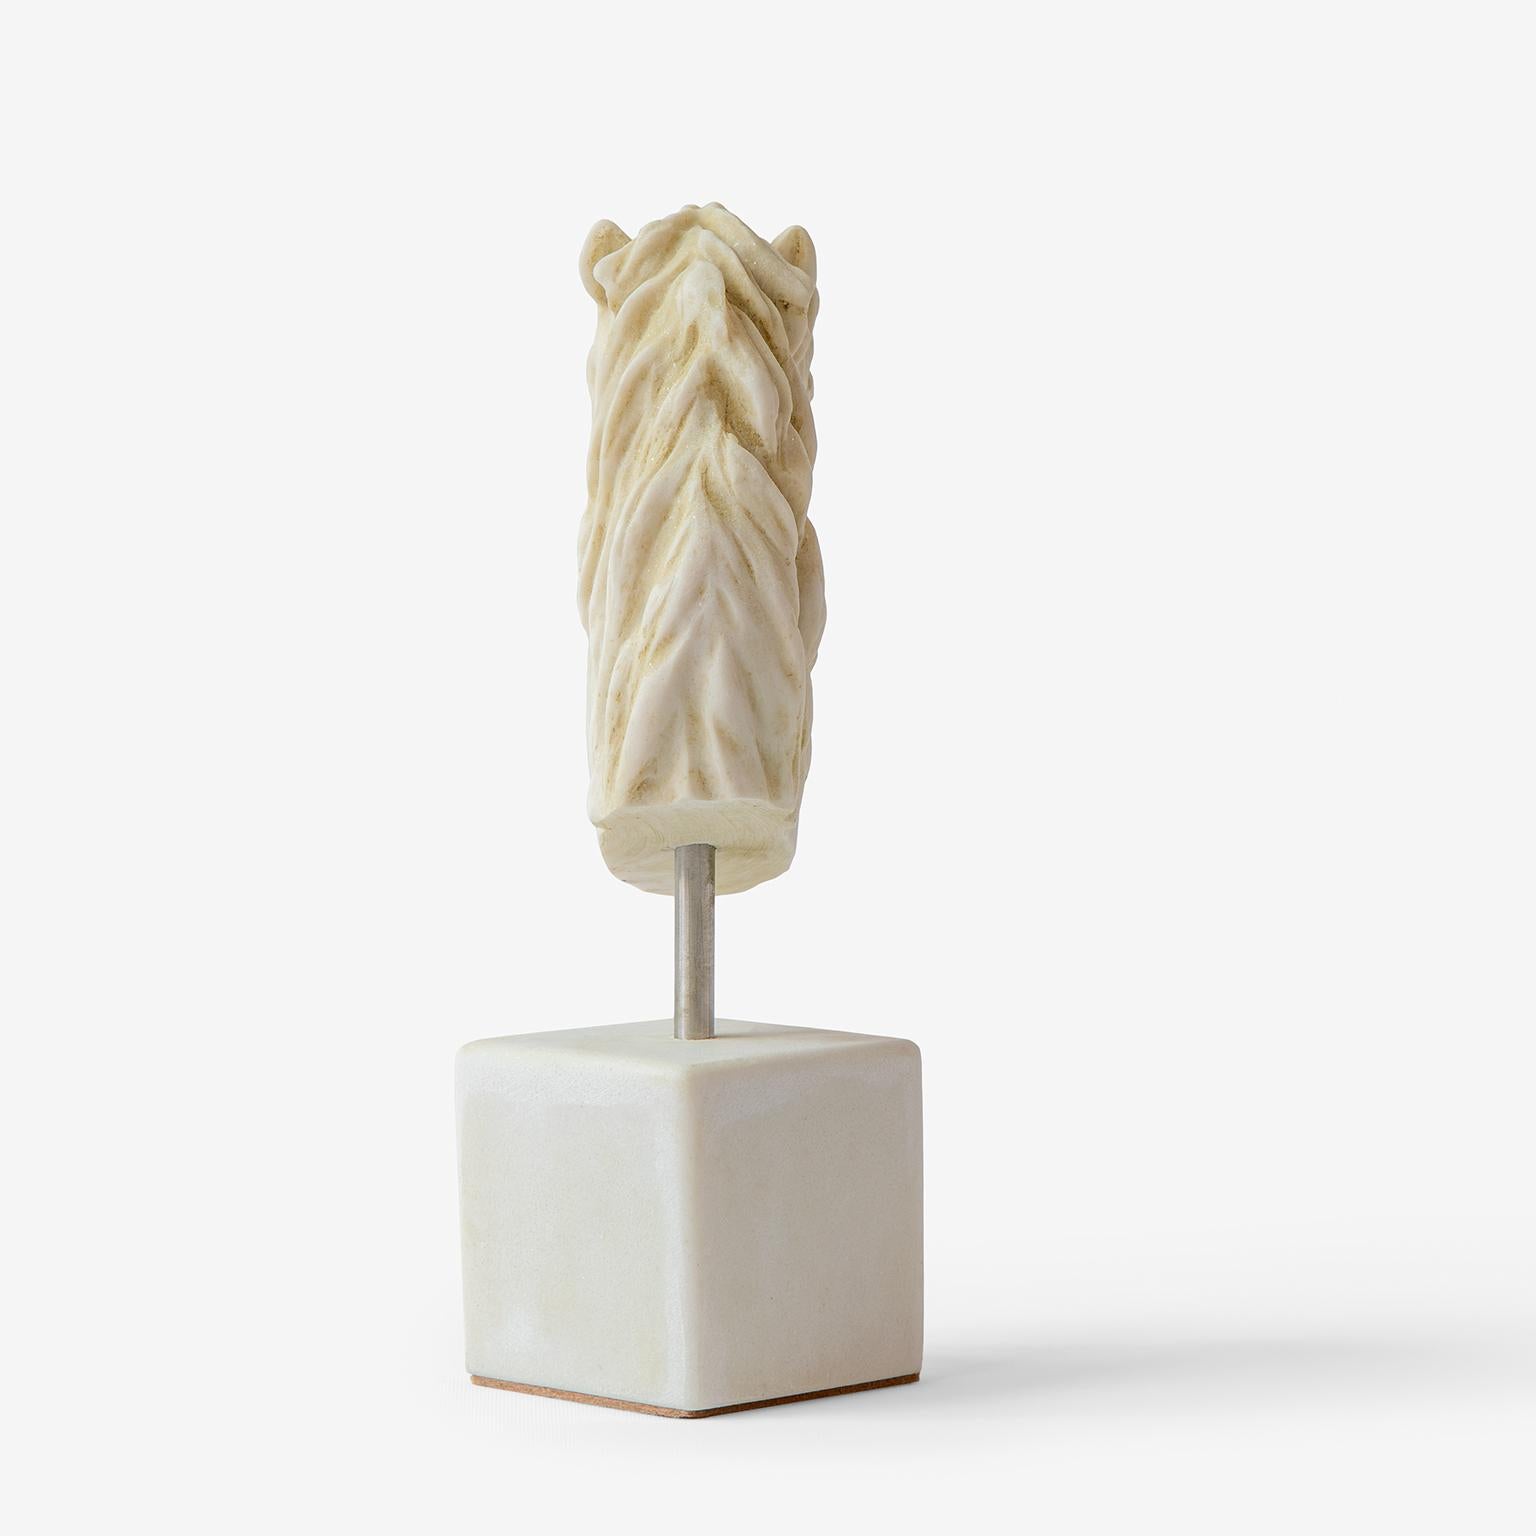 Weight: 1,1 kg

-This is a special working.
-Produced from pressed marble powder.
-Produced from the original molds of the works from the museum.
-The original is displayed in the Istanbul Museum.